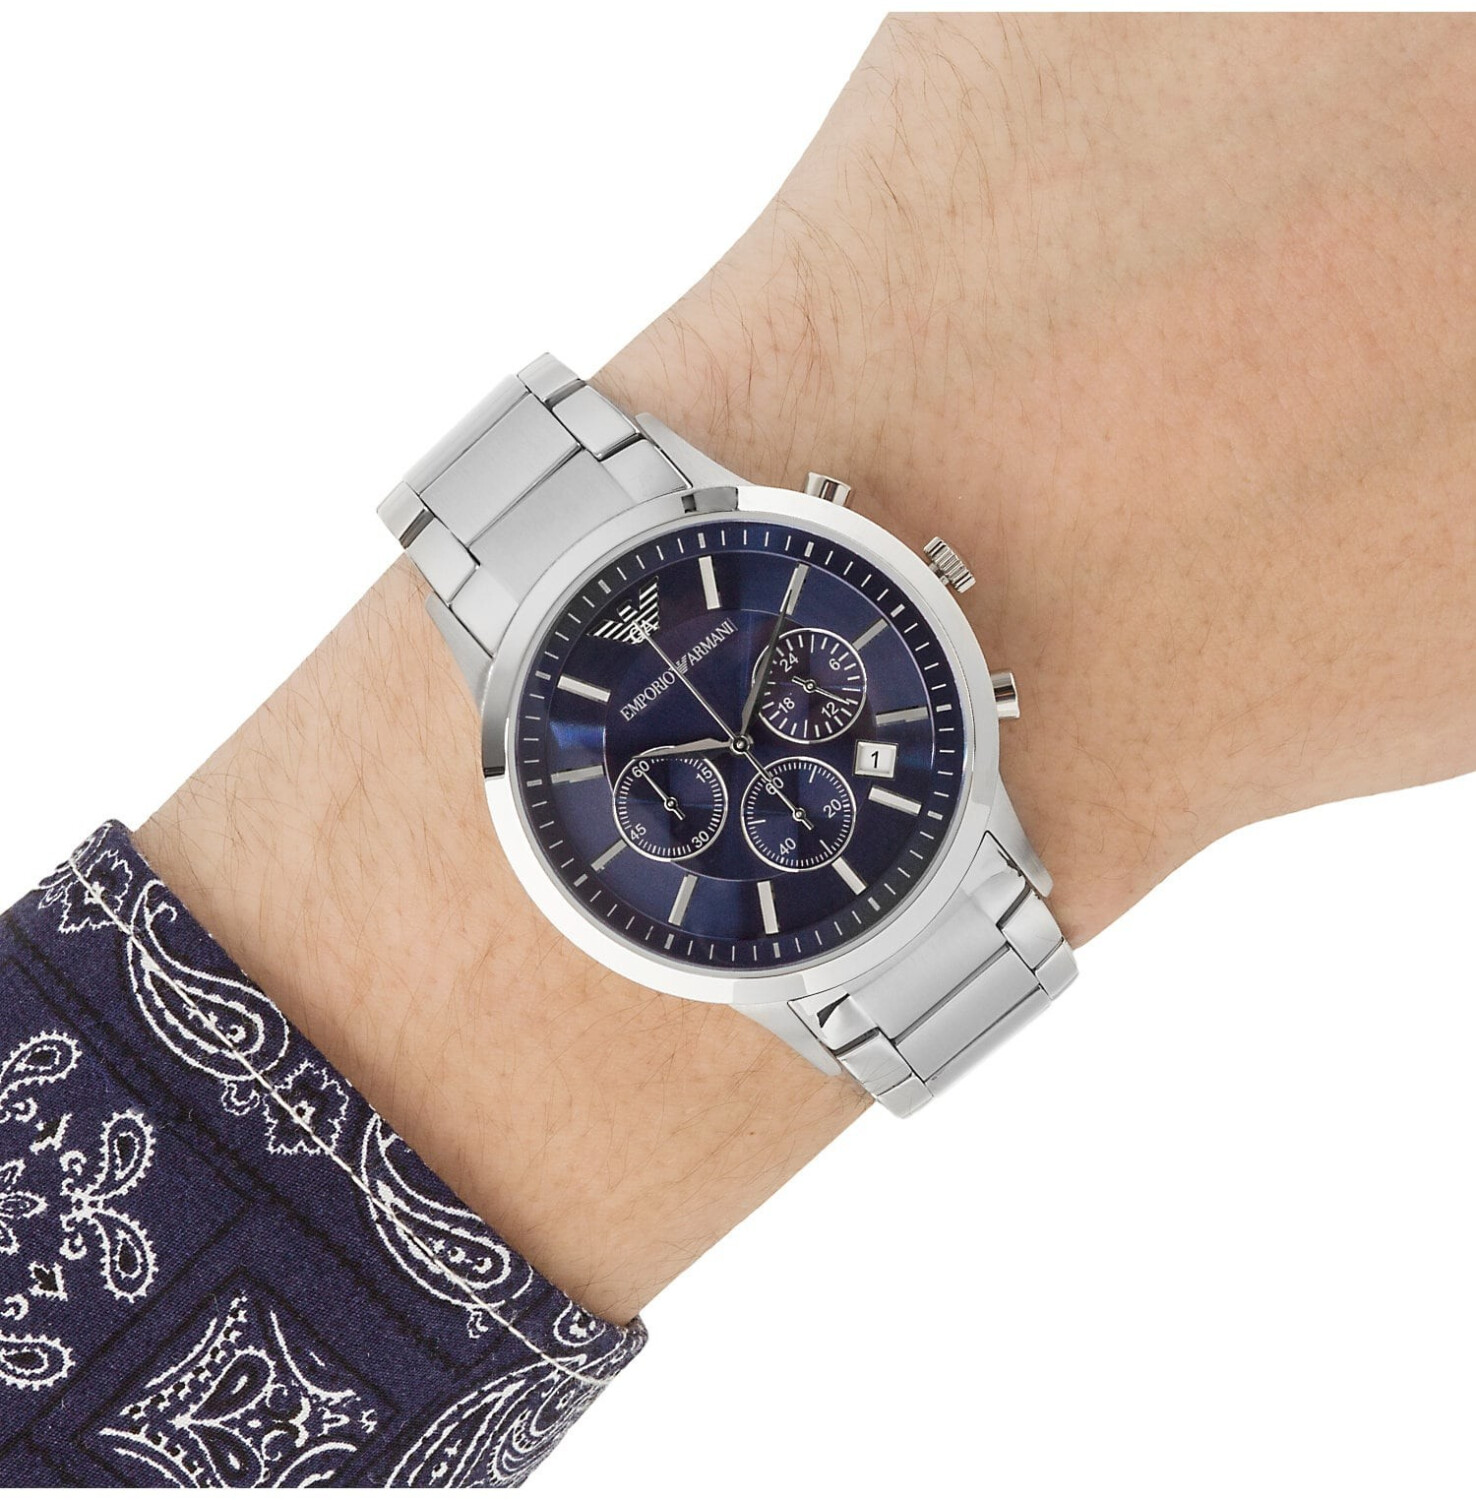 Best £67.53 Deals – AR2448 Renato (Today) Chronograph Emporio Buy from on Armani